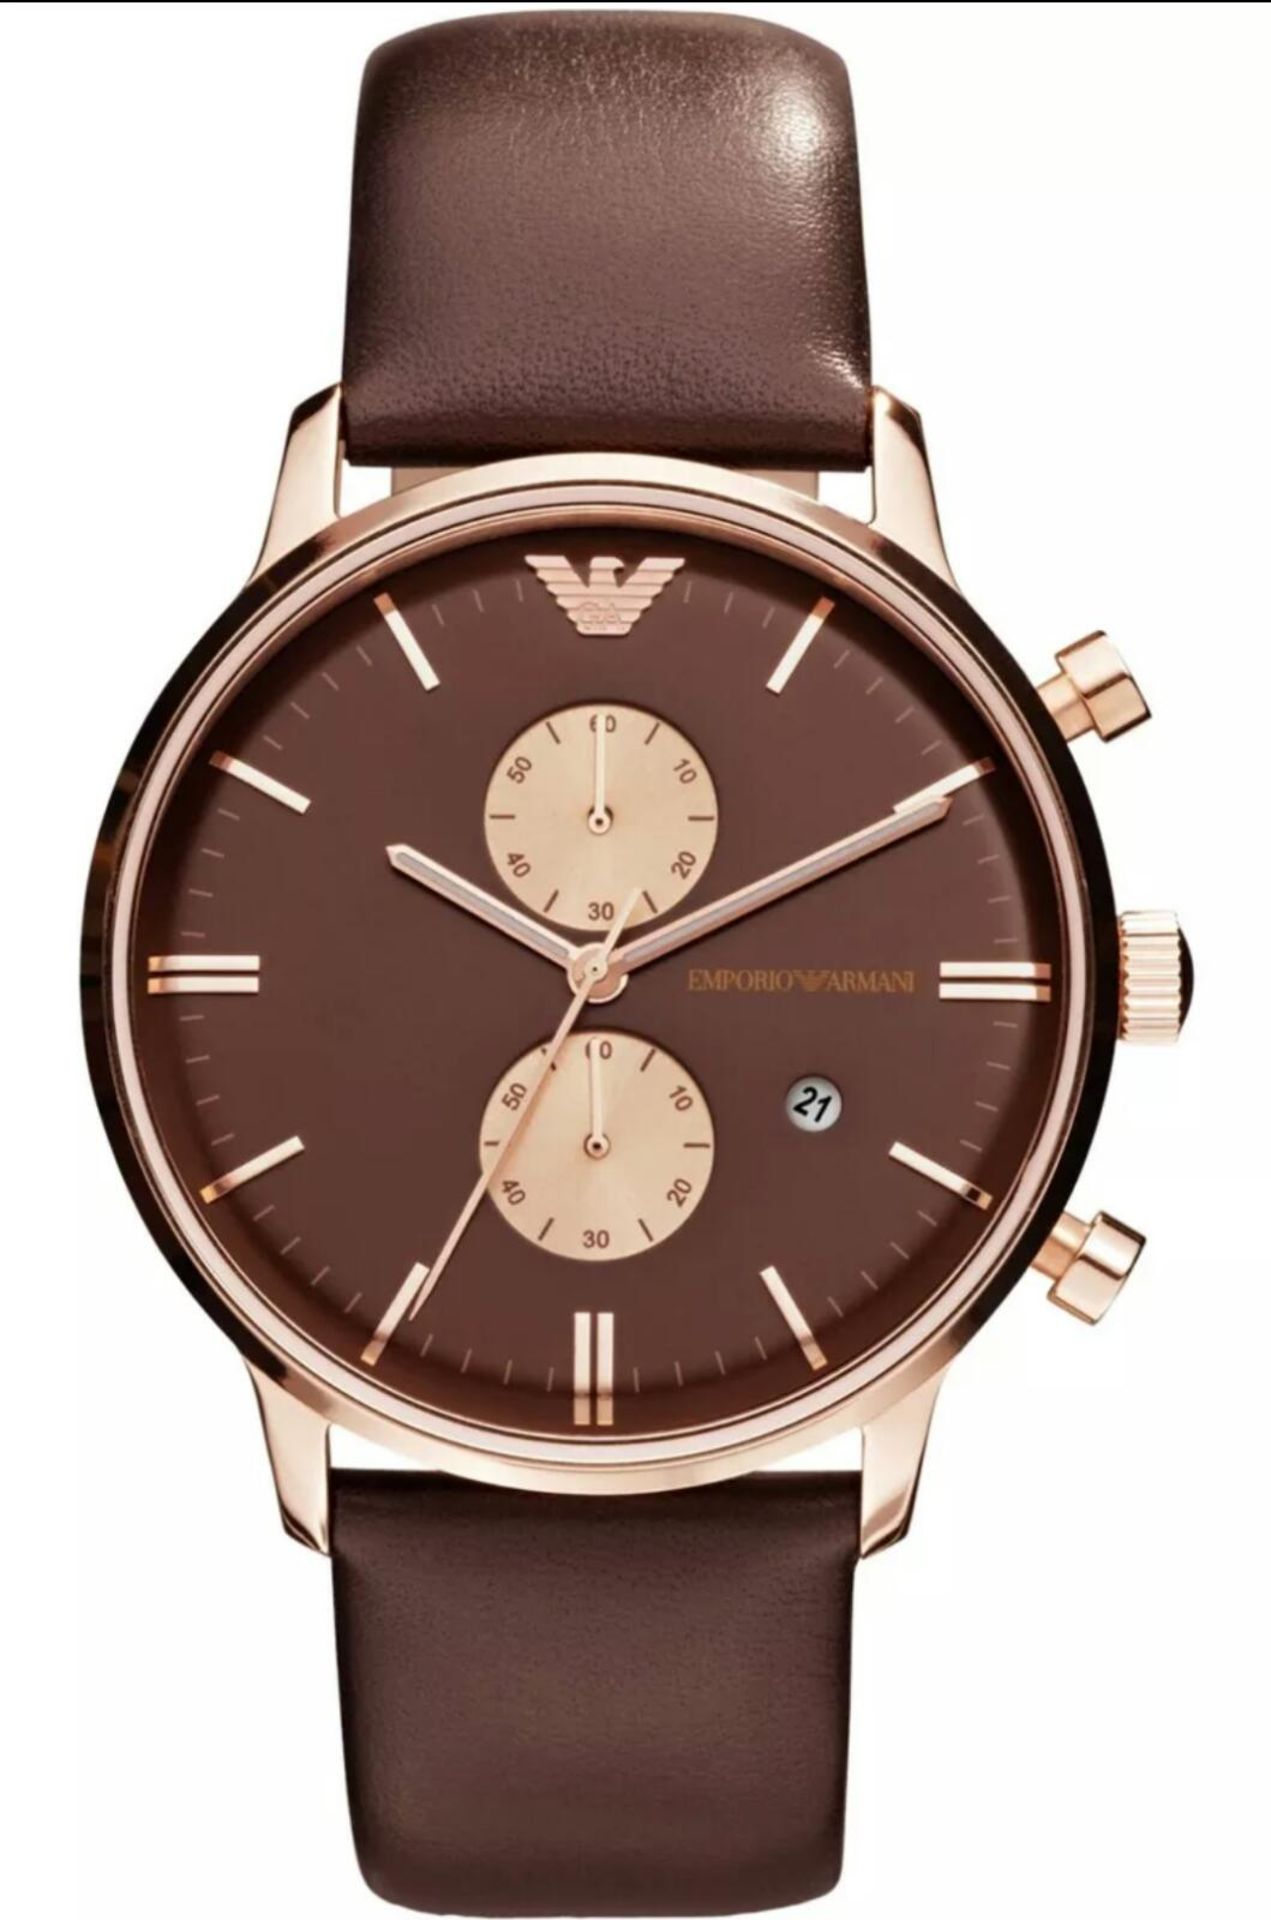 BRAND NEW EMPORIO ARMANI AR0387, GENTS CHRONOGRAPH WATCH, WITH A BROWN CIRCULAR DIAL AND BROWN